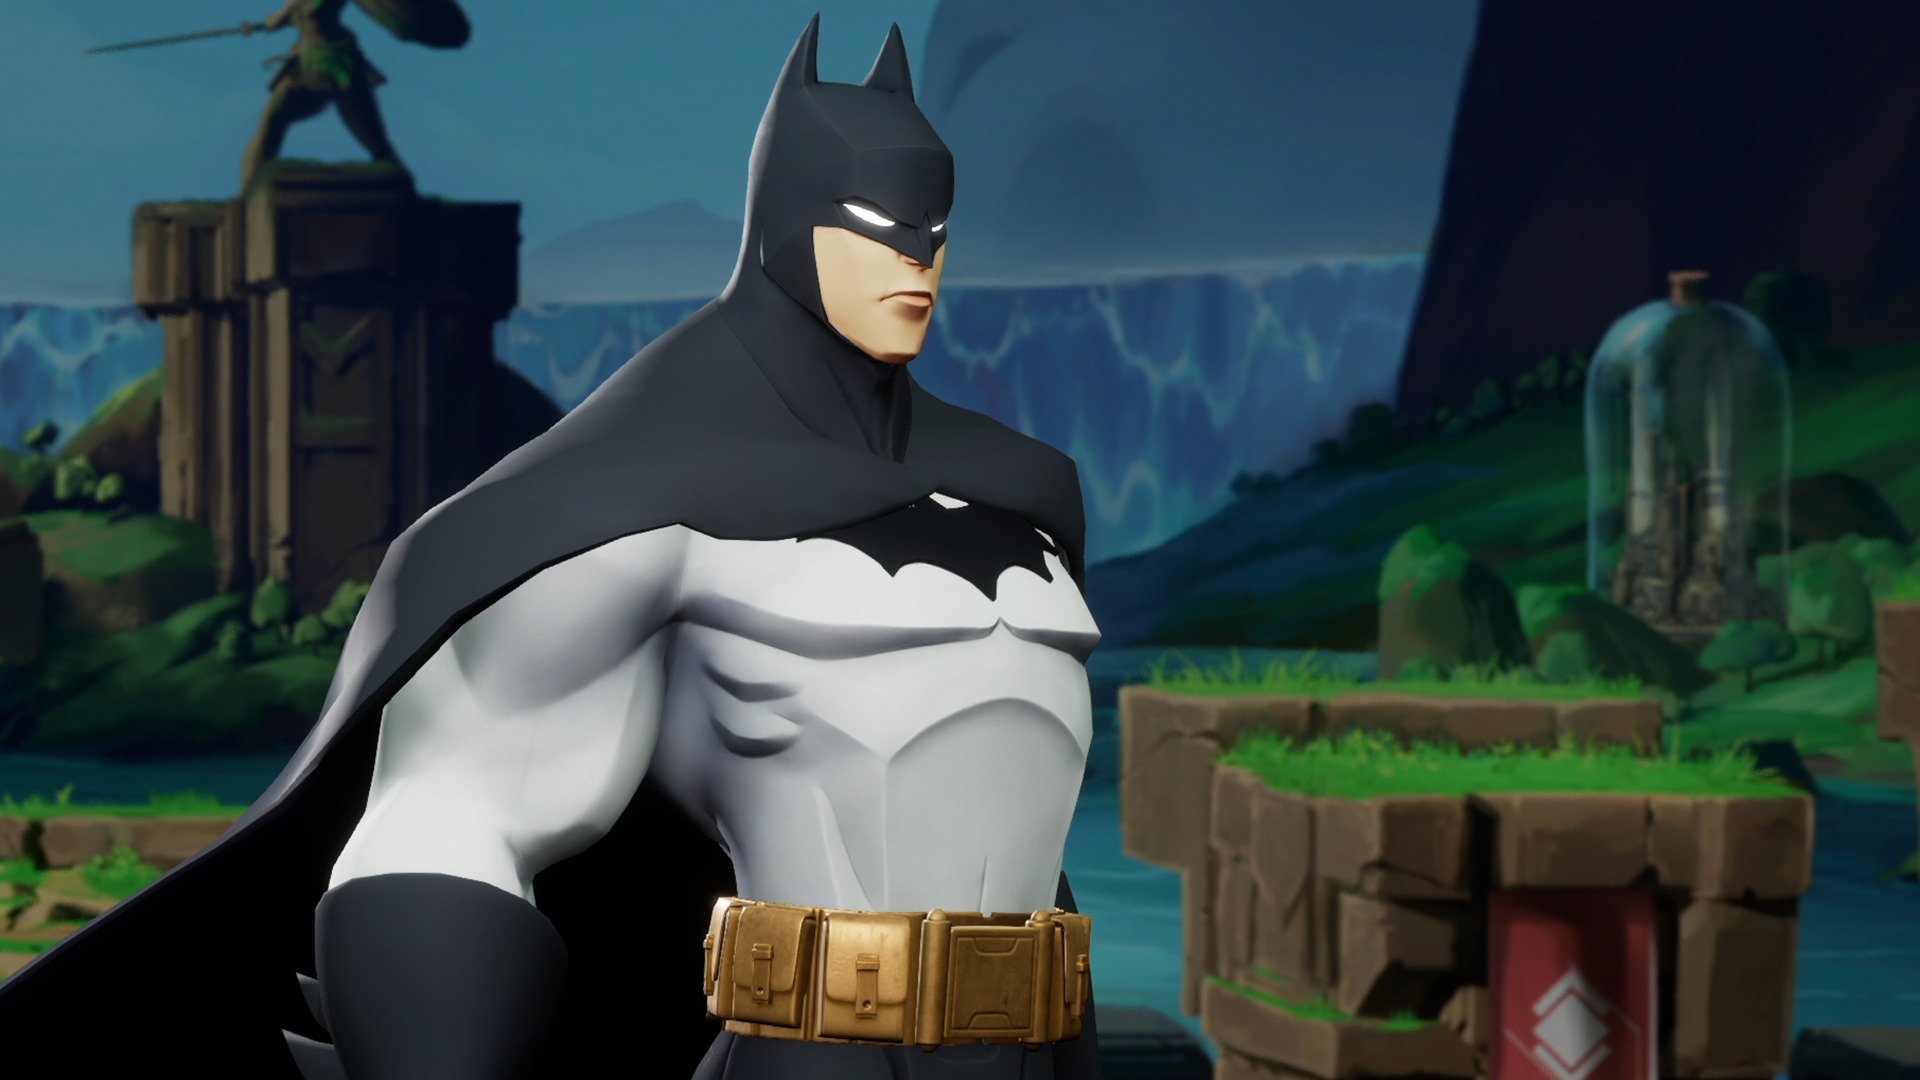 MultiVersus: Batman - All Unlockables, Perks, Moves, and How to